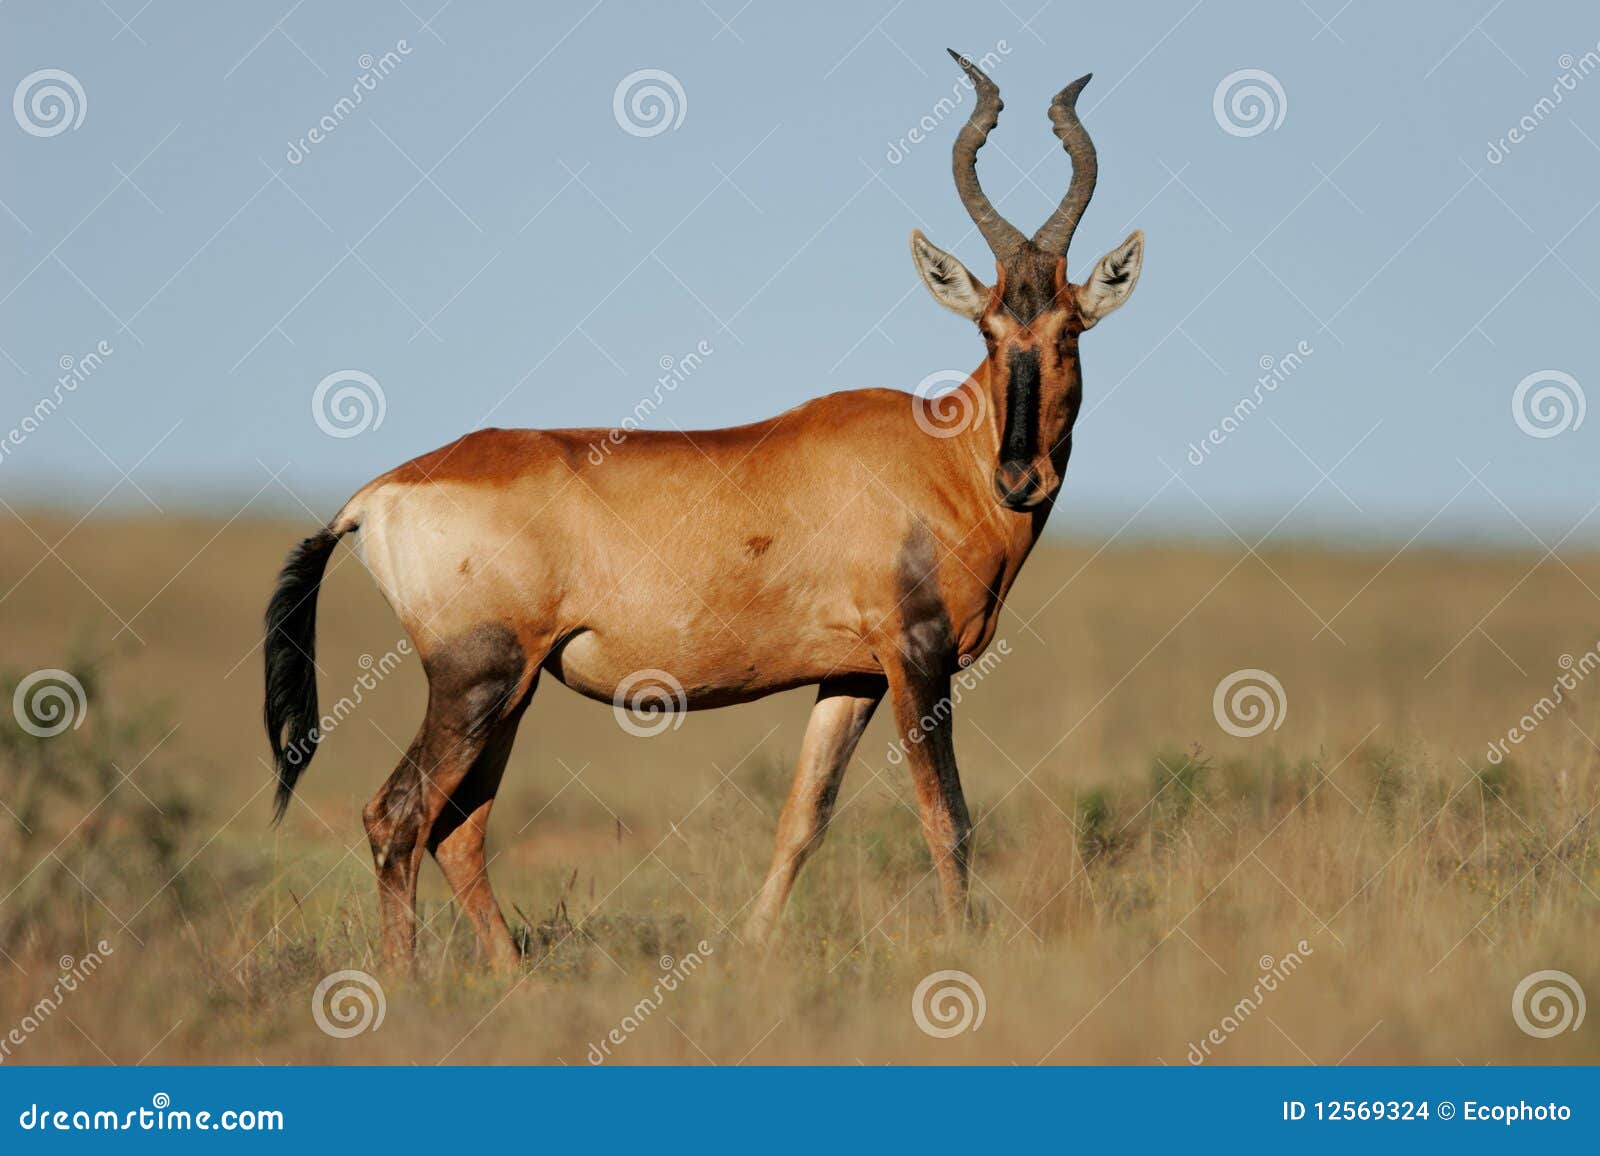 red hartebeest, south africa